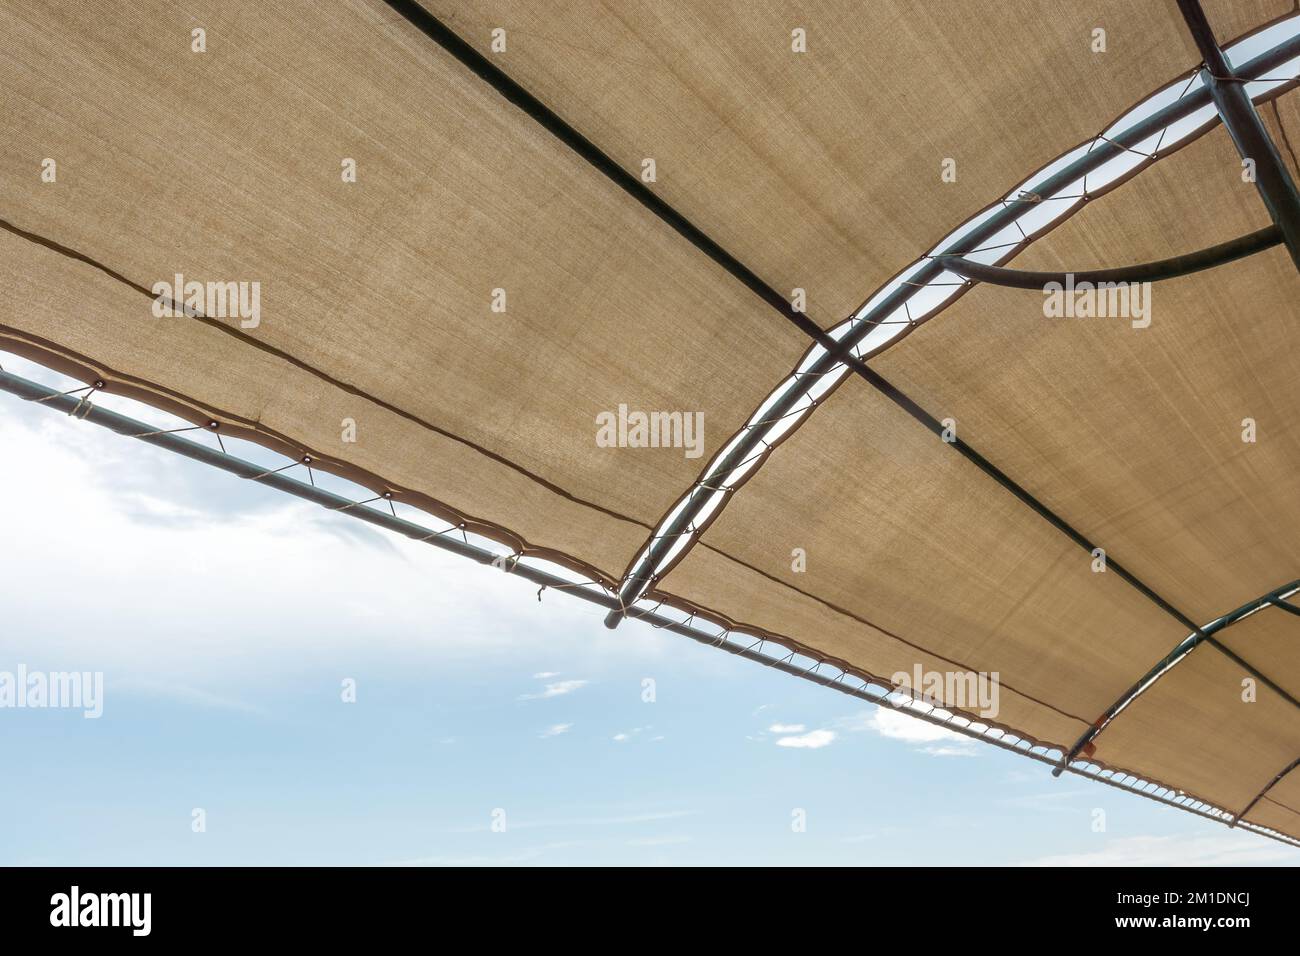 Large canopy made of fabric for protection against the sun Stock Photo